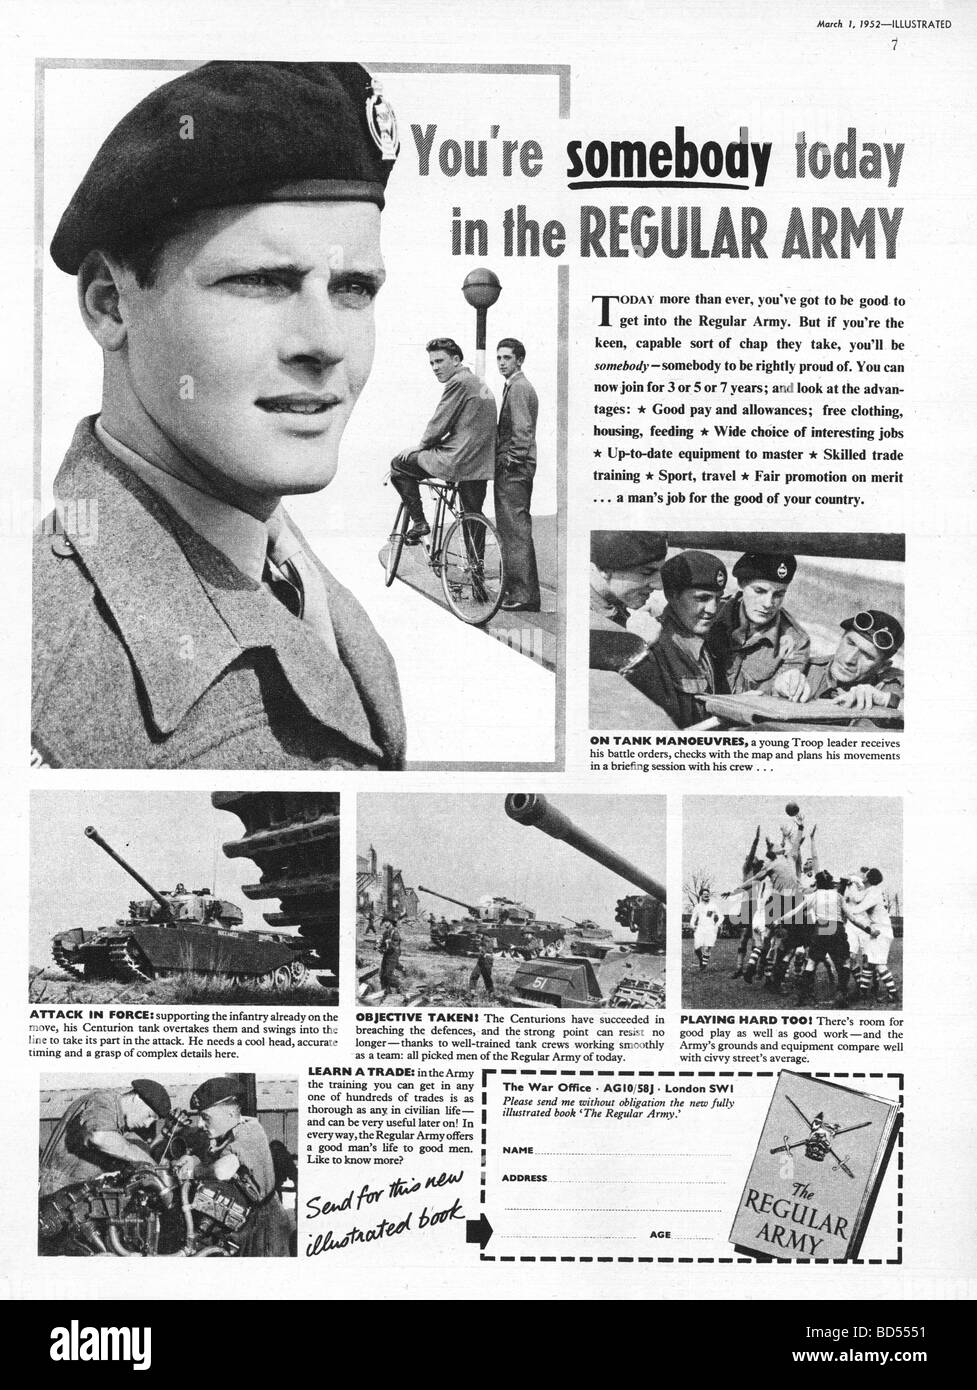 British Army recruitment advert featuring Roger Moore in 1952 Stock Photo